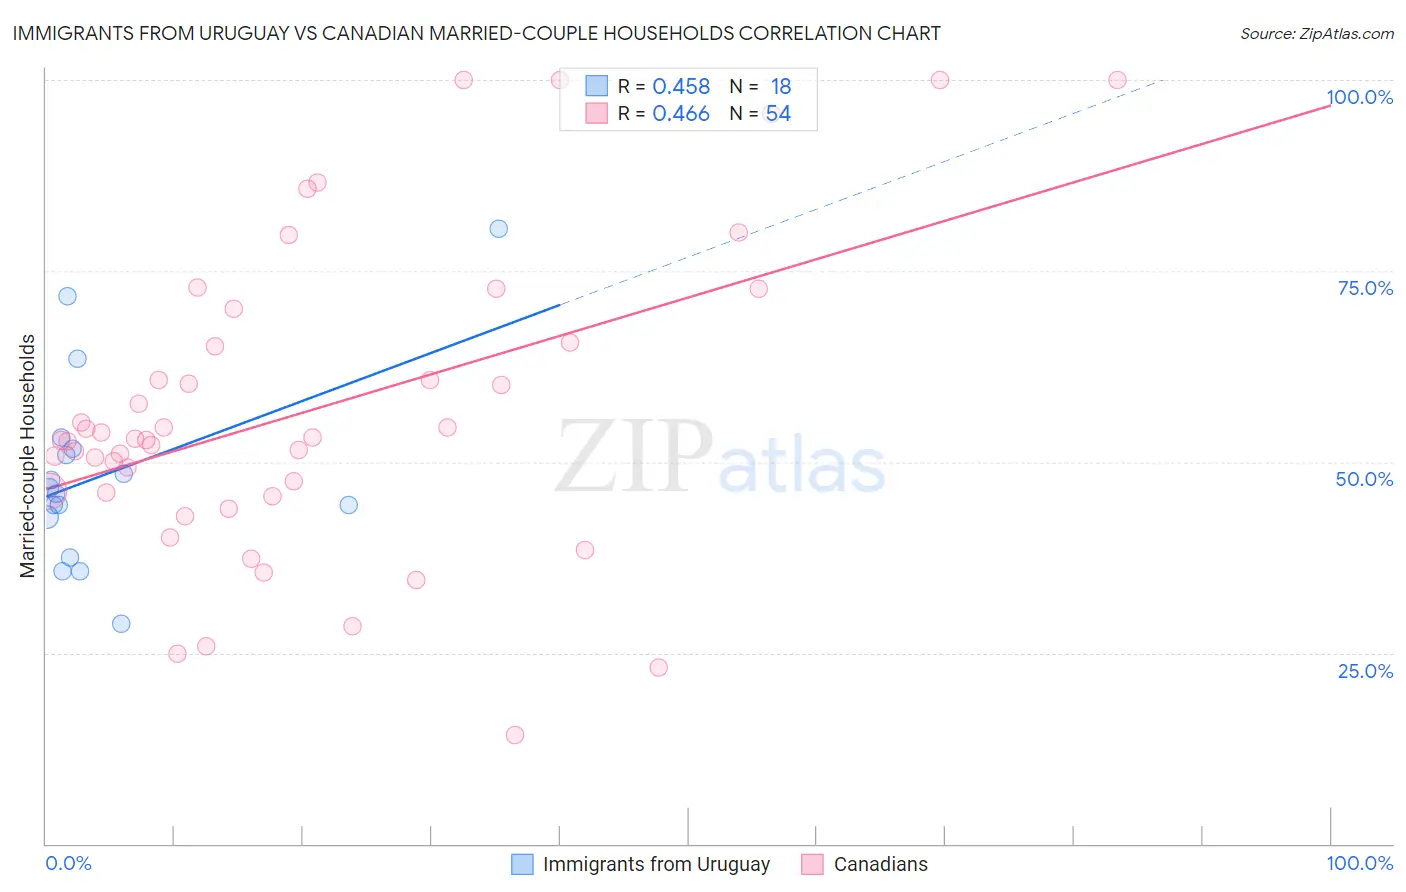 Immigrants from Uruguay vs Canadian Married-couple Households